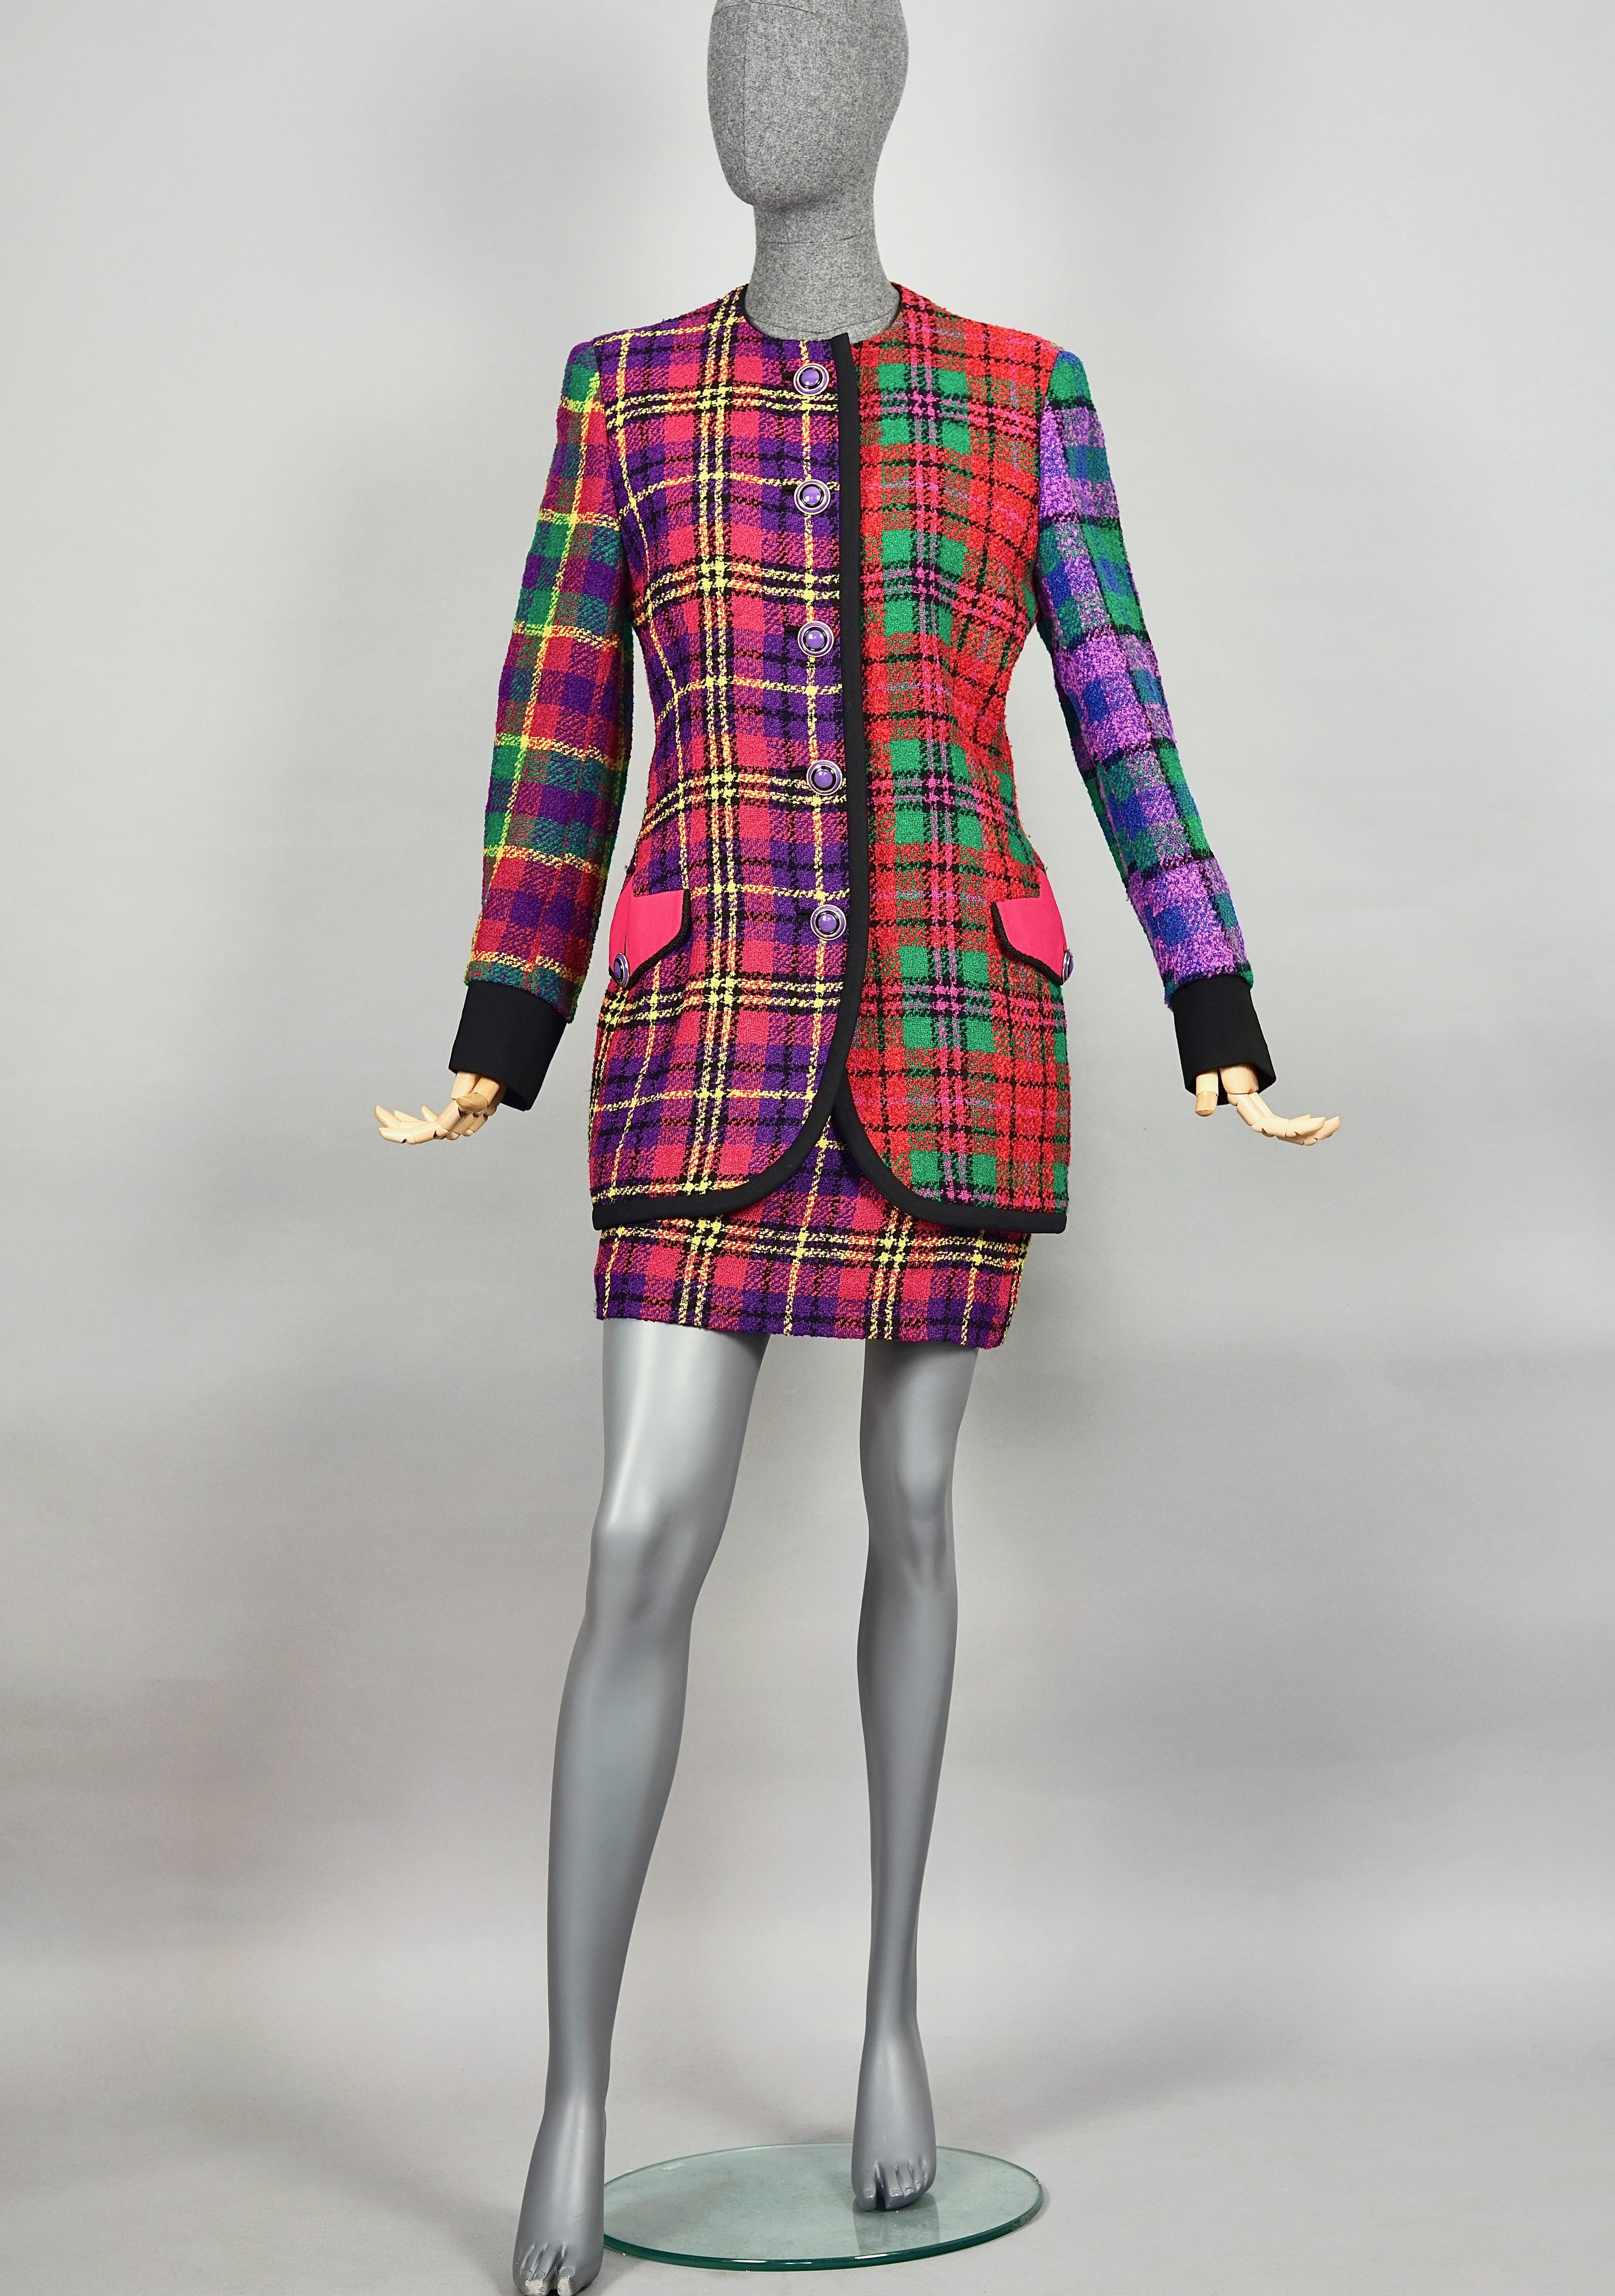 Vintage 1991 A/W GIANNI VERSACE Couture Plaid Tartan Patchwork Jacket Skirt Suit

Measurements taken laid flat, please double bust, waist, hips and hems:
JACKET
Shoulder: 16.14 inches (41 cm)
Sleeves: 24 inches (61 cm)
Bust: 19.29 inches (49